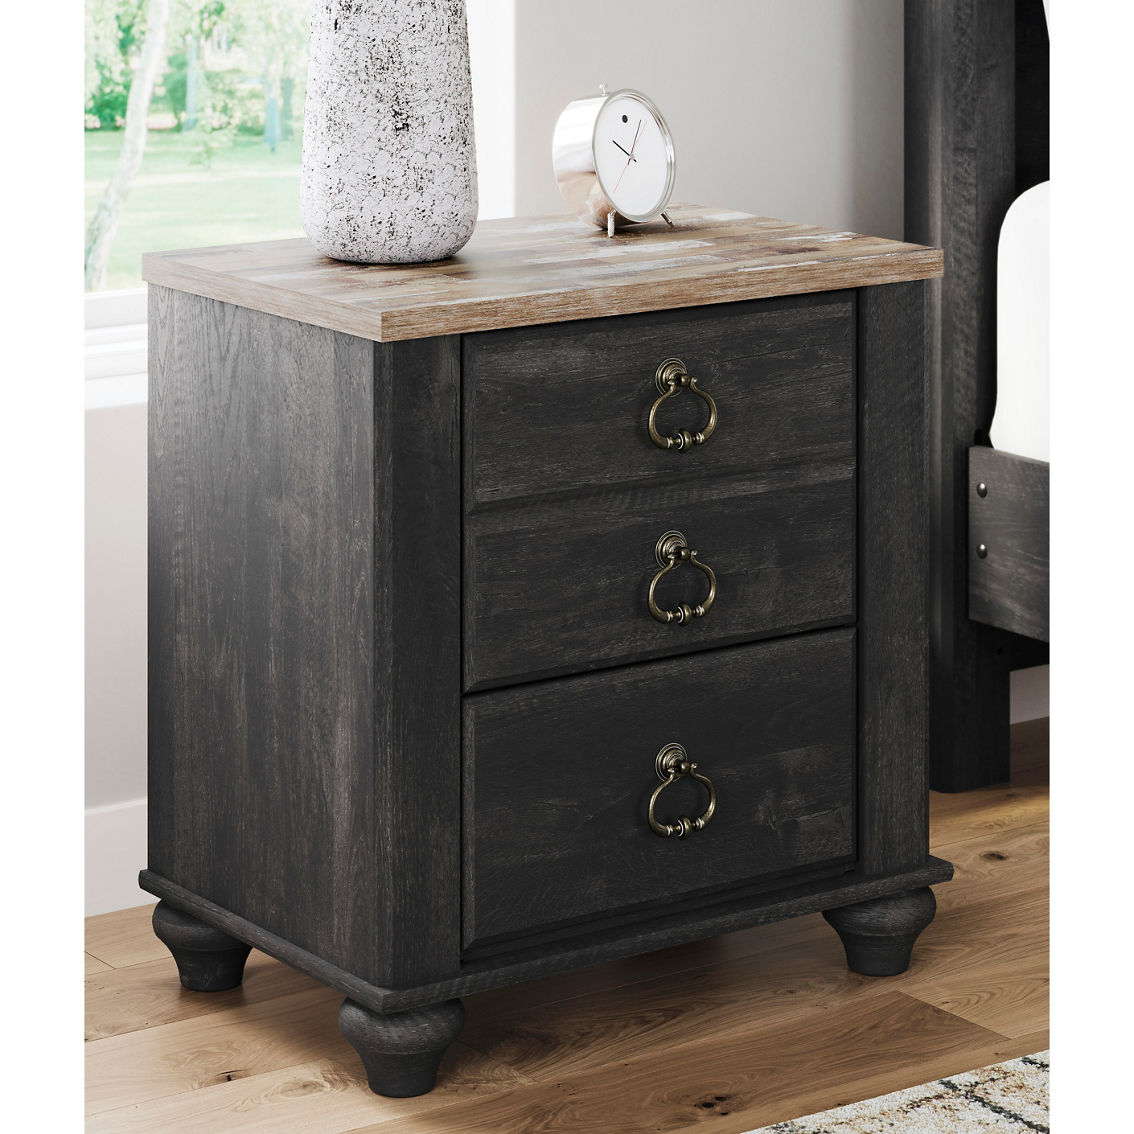 Signature Design by Ashley Nanforth Nightstand - Image 6 of 8